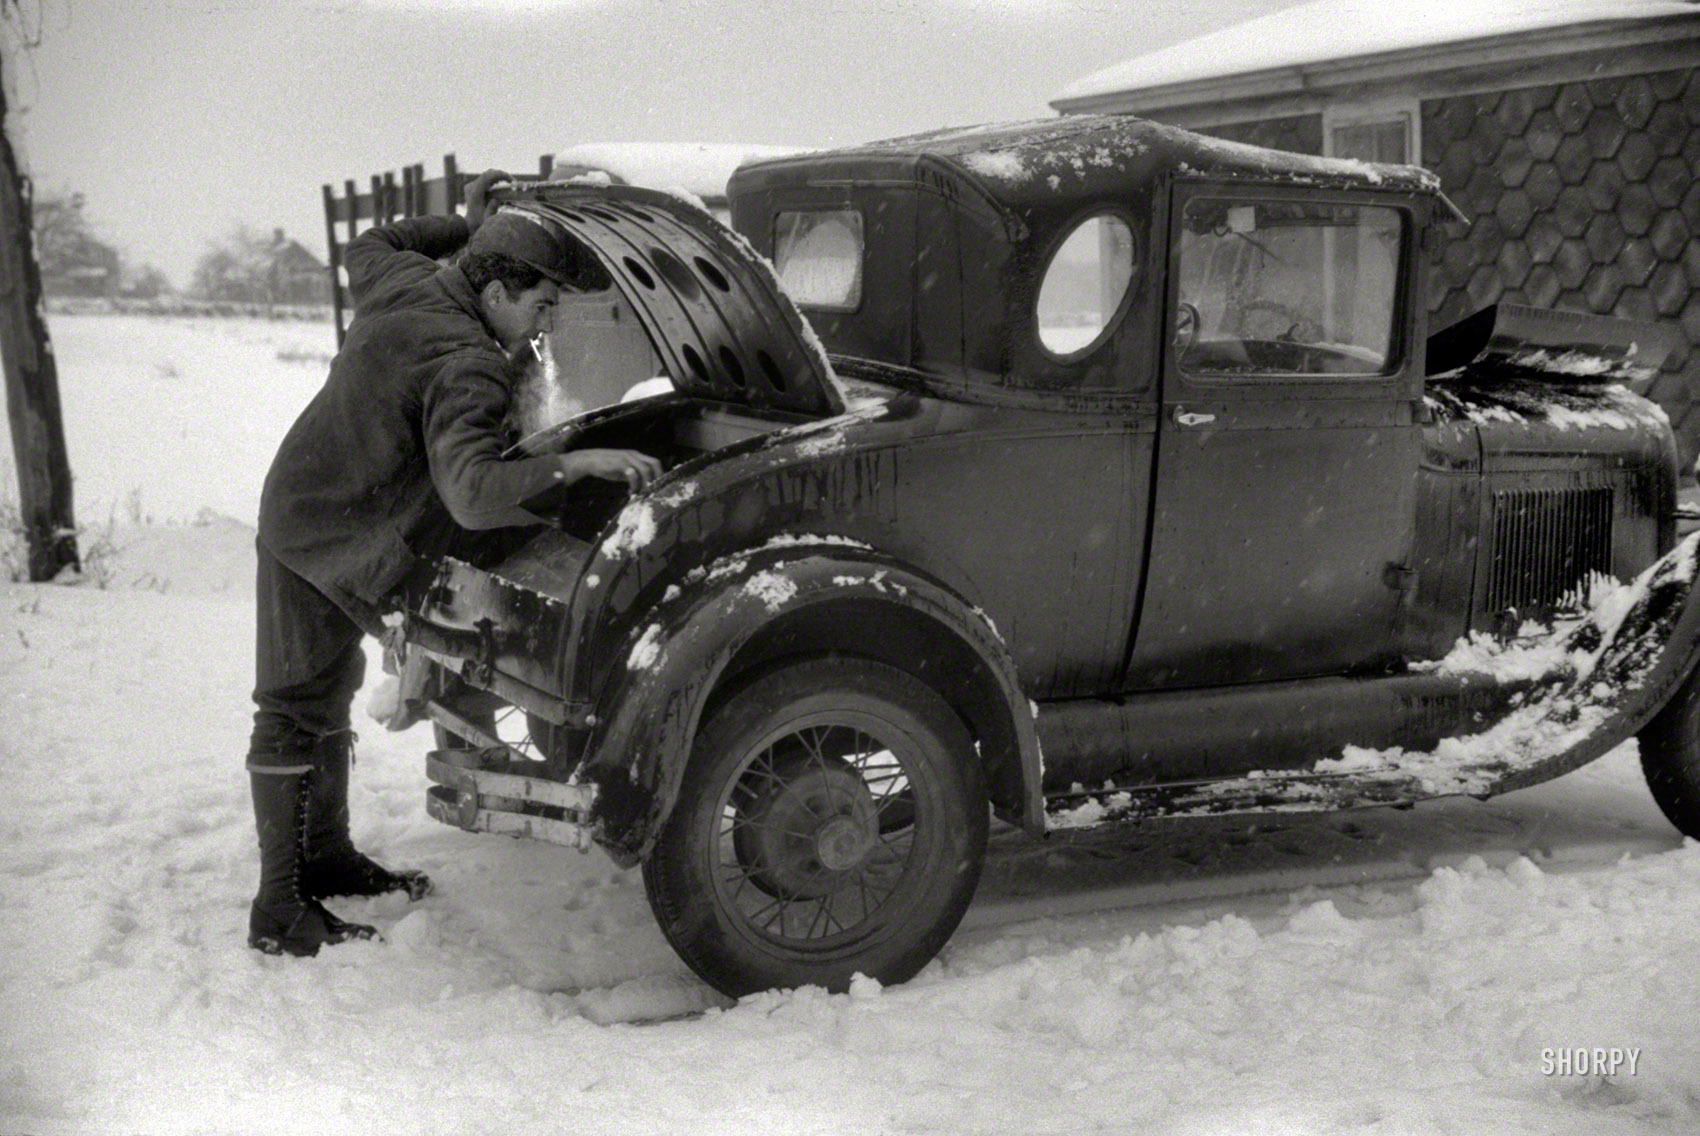 December 1940. "The son of Mr. John Rambone, Italian market gardener getting ready for a trip into town. Johnston, Rhode Island." Let the automotive discussion begin! 35mm nitrate negative by Jack Delano. View full size.